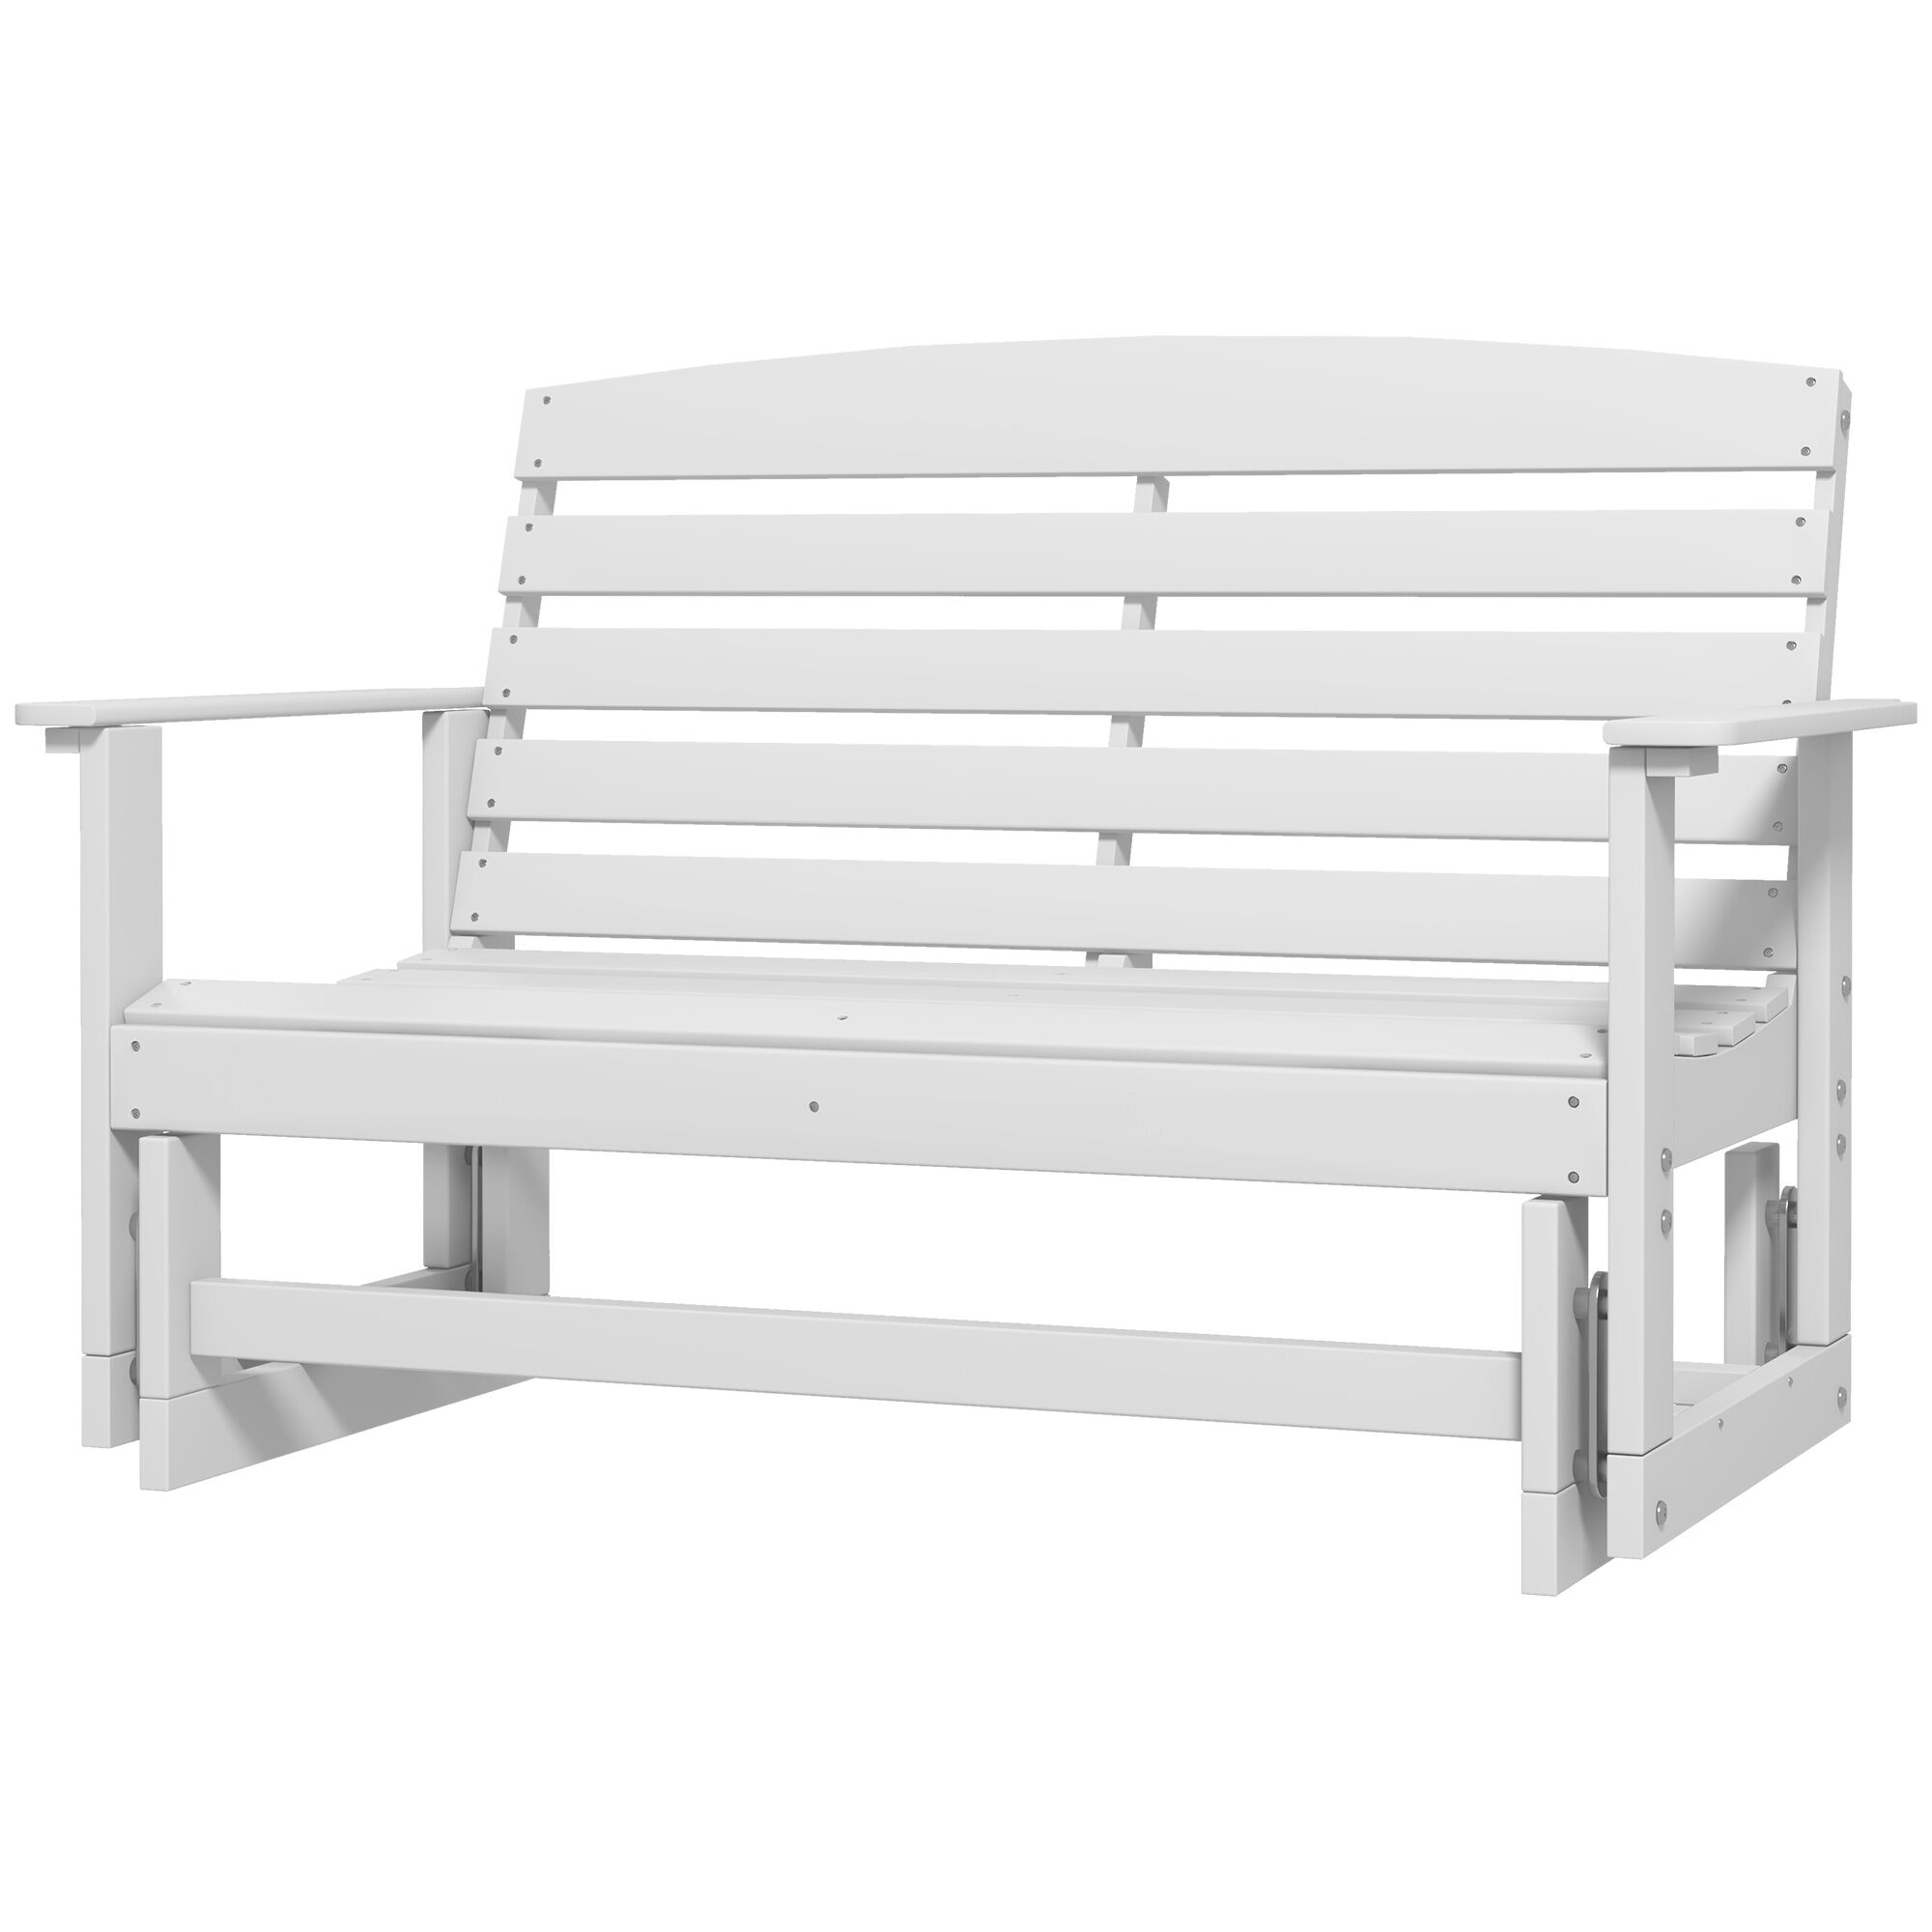 Outsunny 2-Person Glider Bench, with All-Weather HDPE Slatted Design, Smooth Motion, Supports Up to 528 lbs., for Patio, Garden, White   Aosom.com